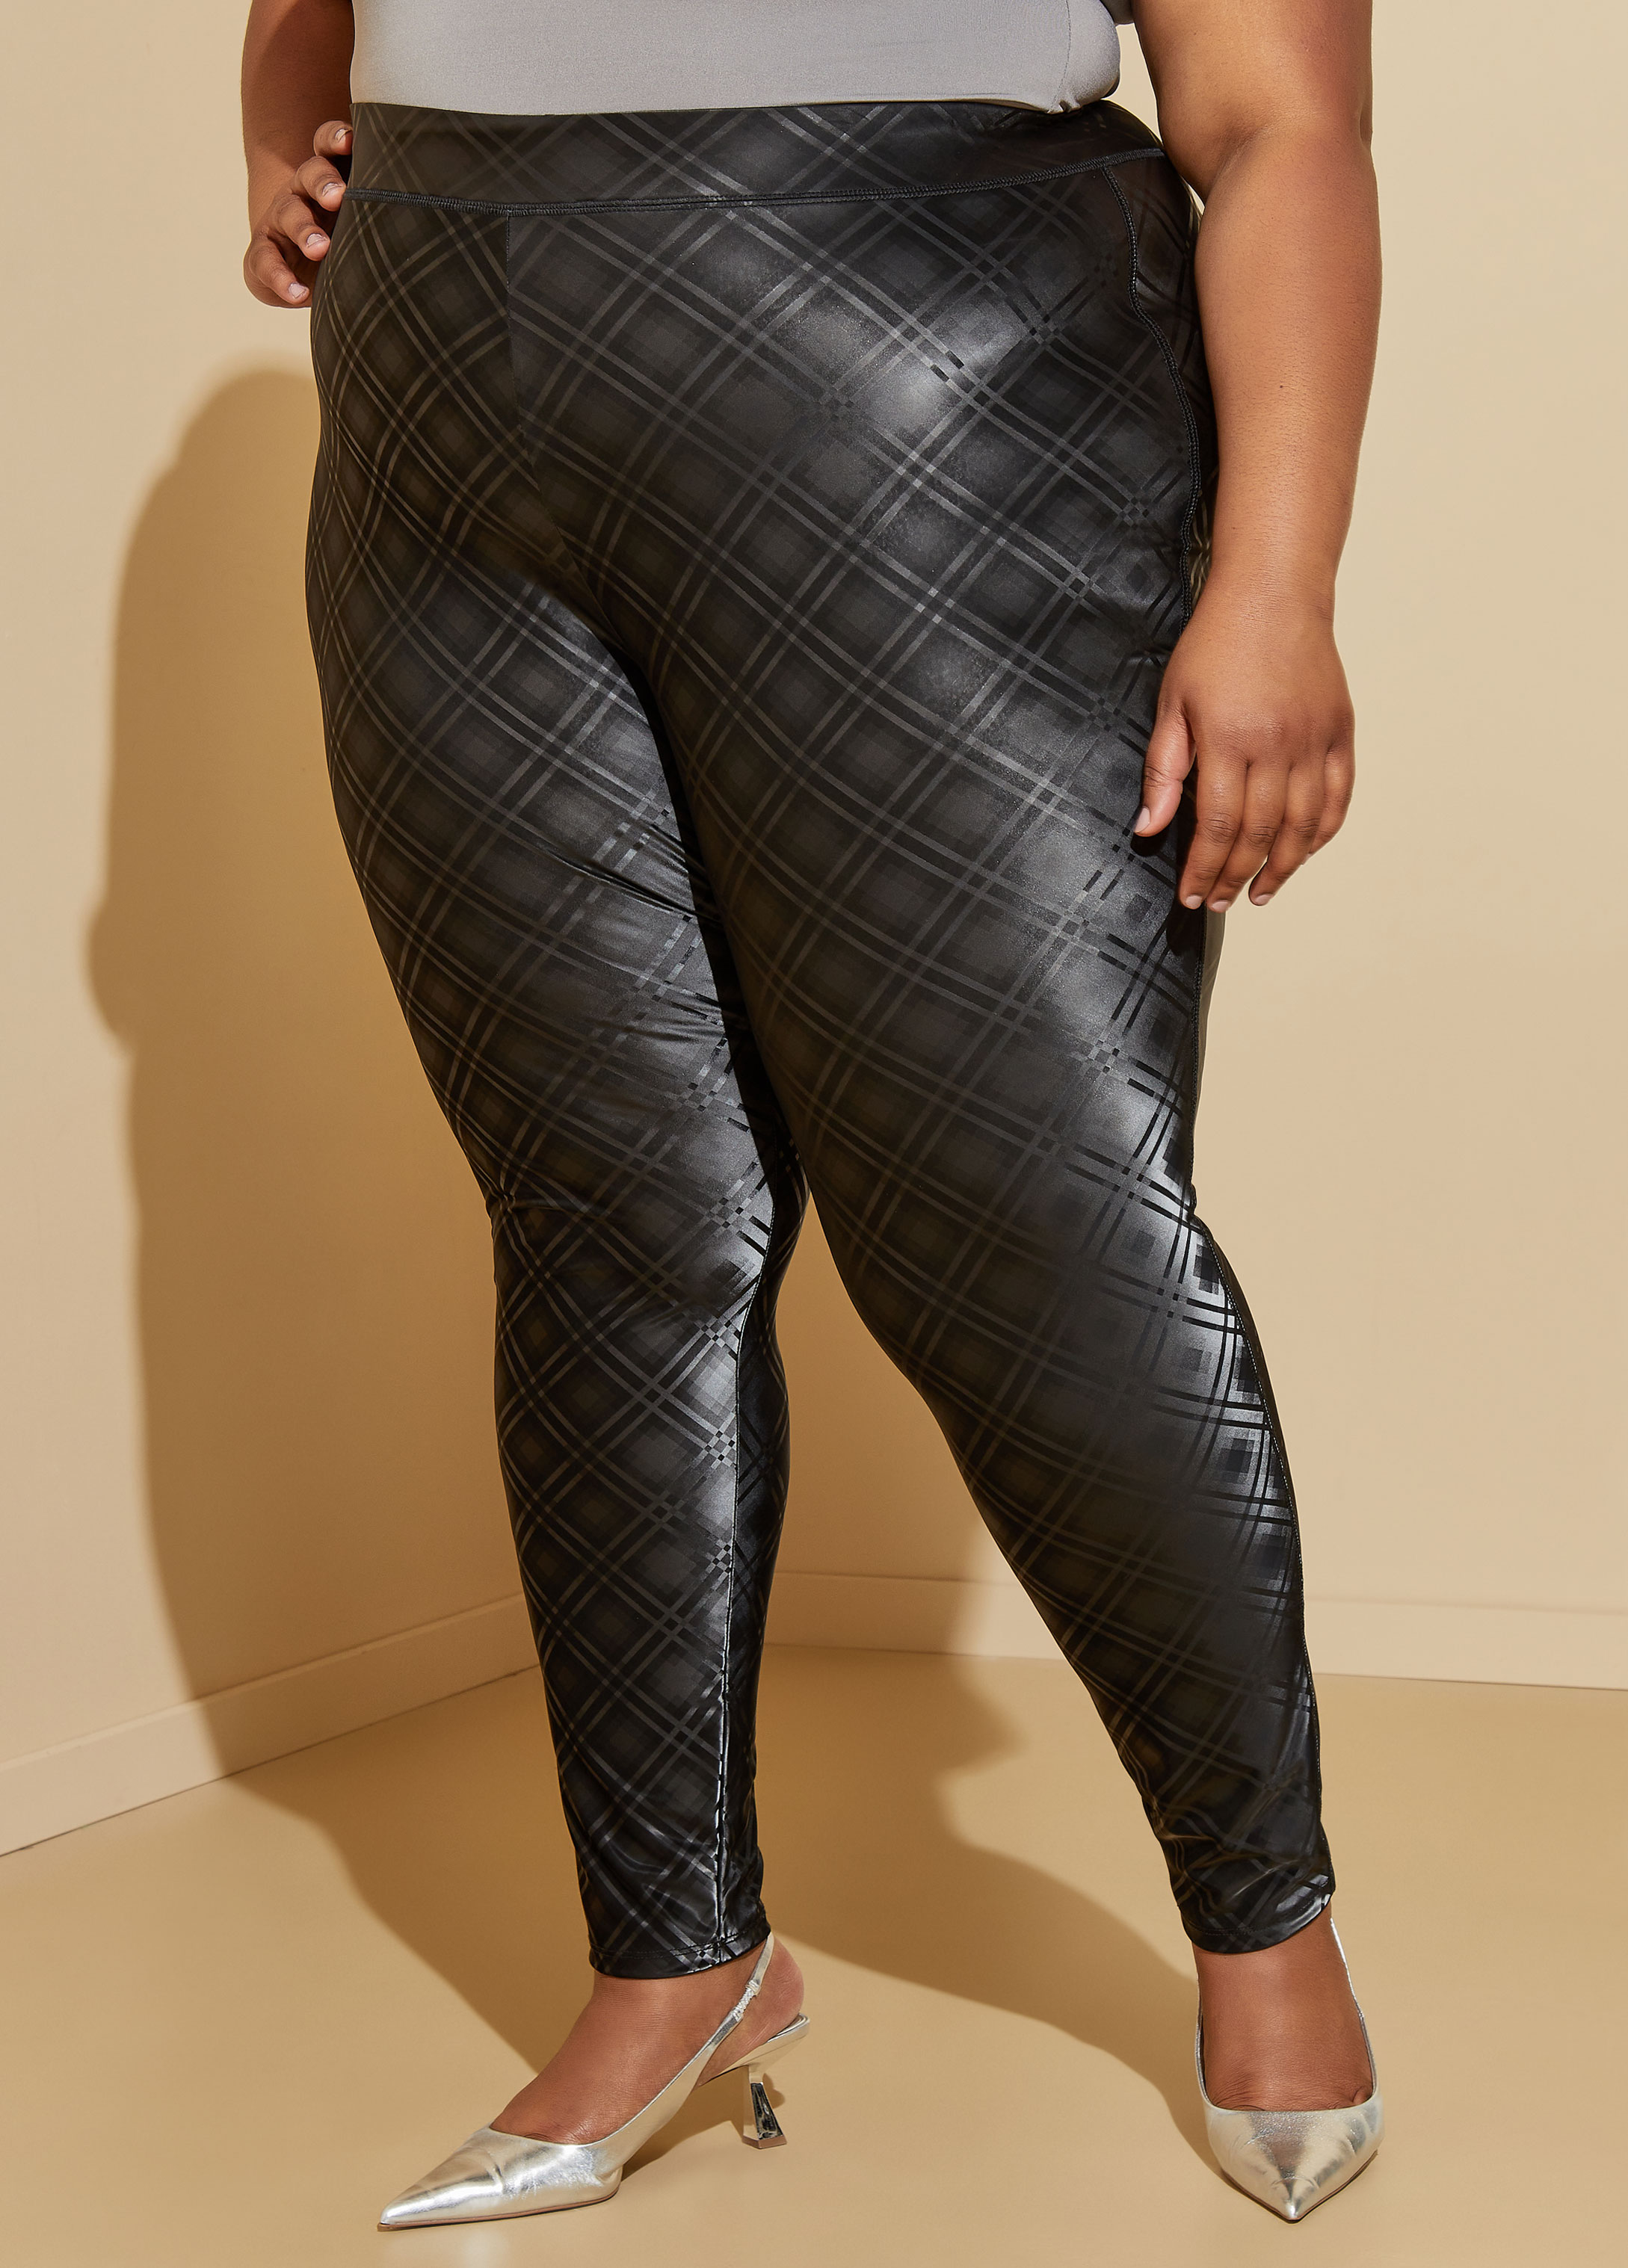 Plus Size Printed Faux Leather Leggings High Waist Vegan Leather